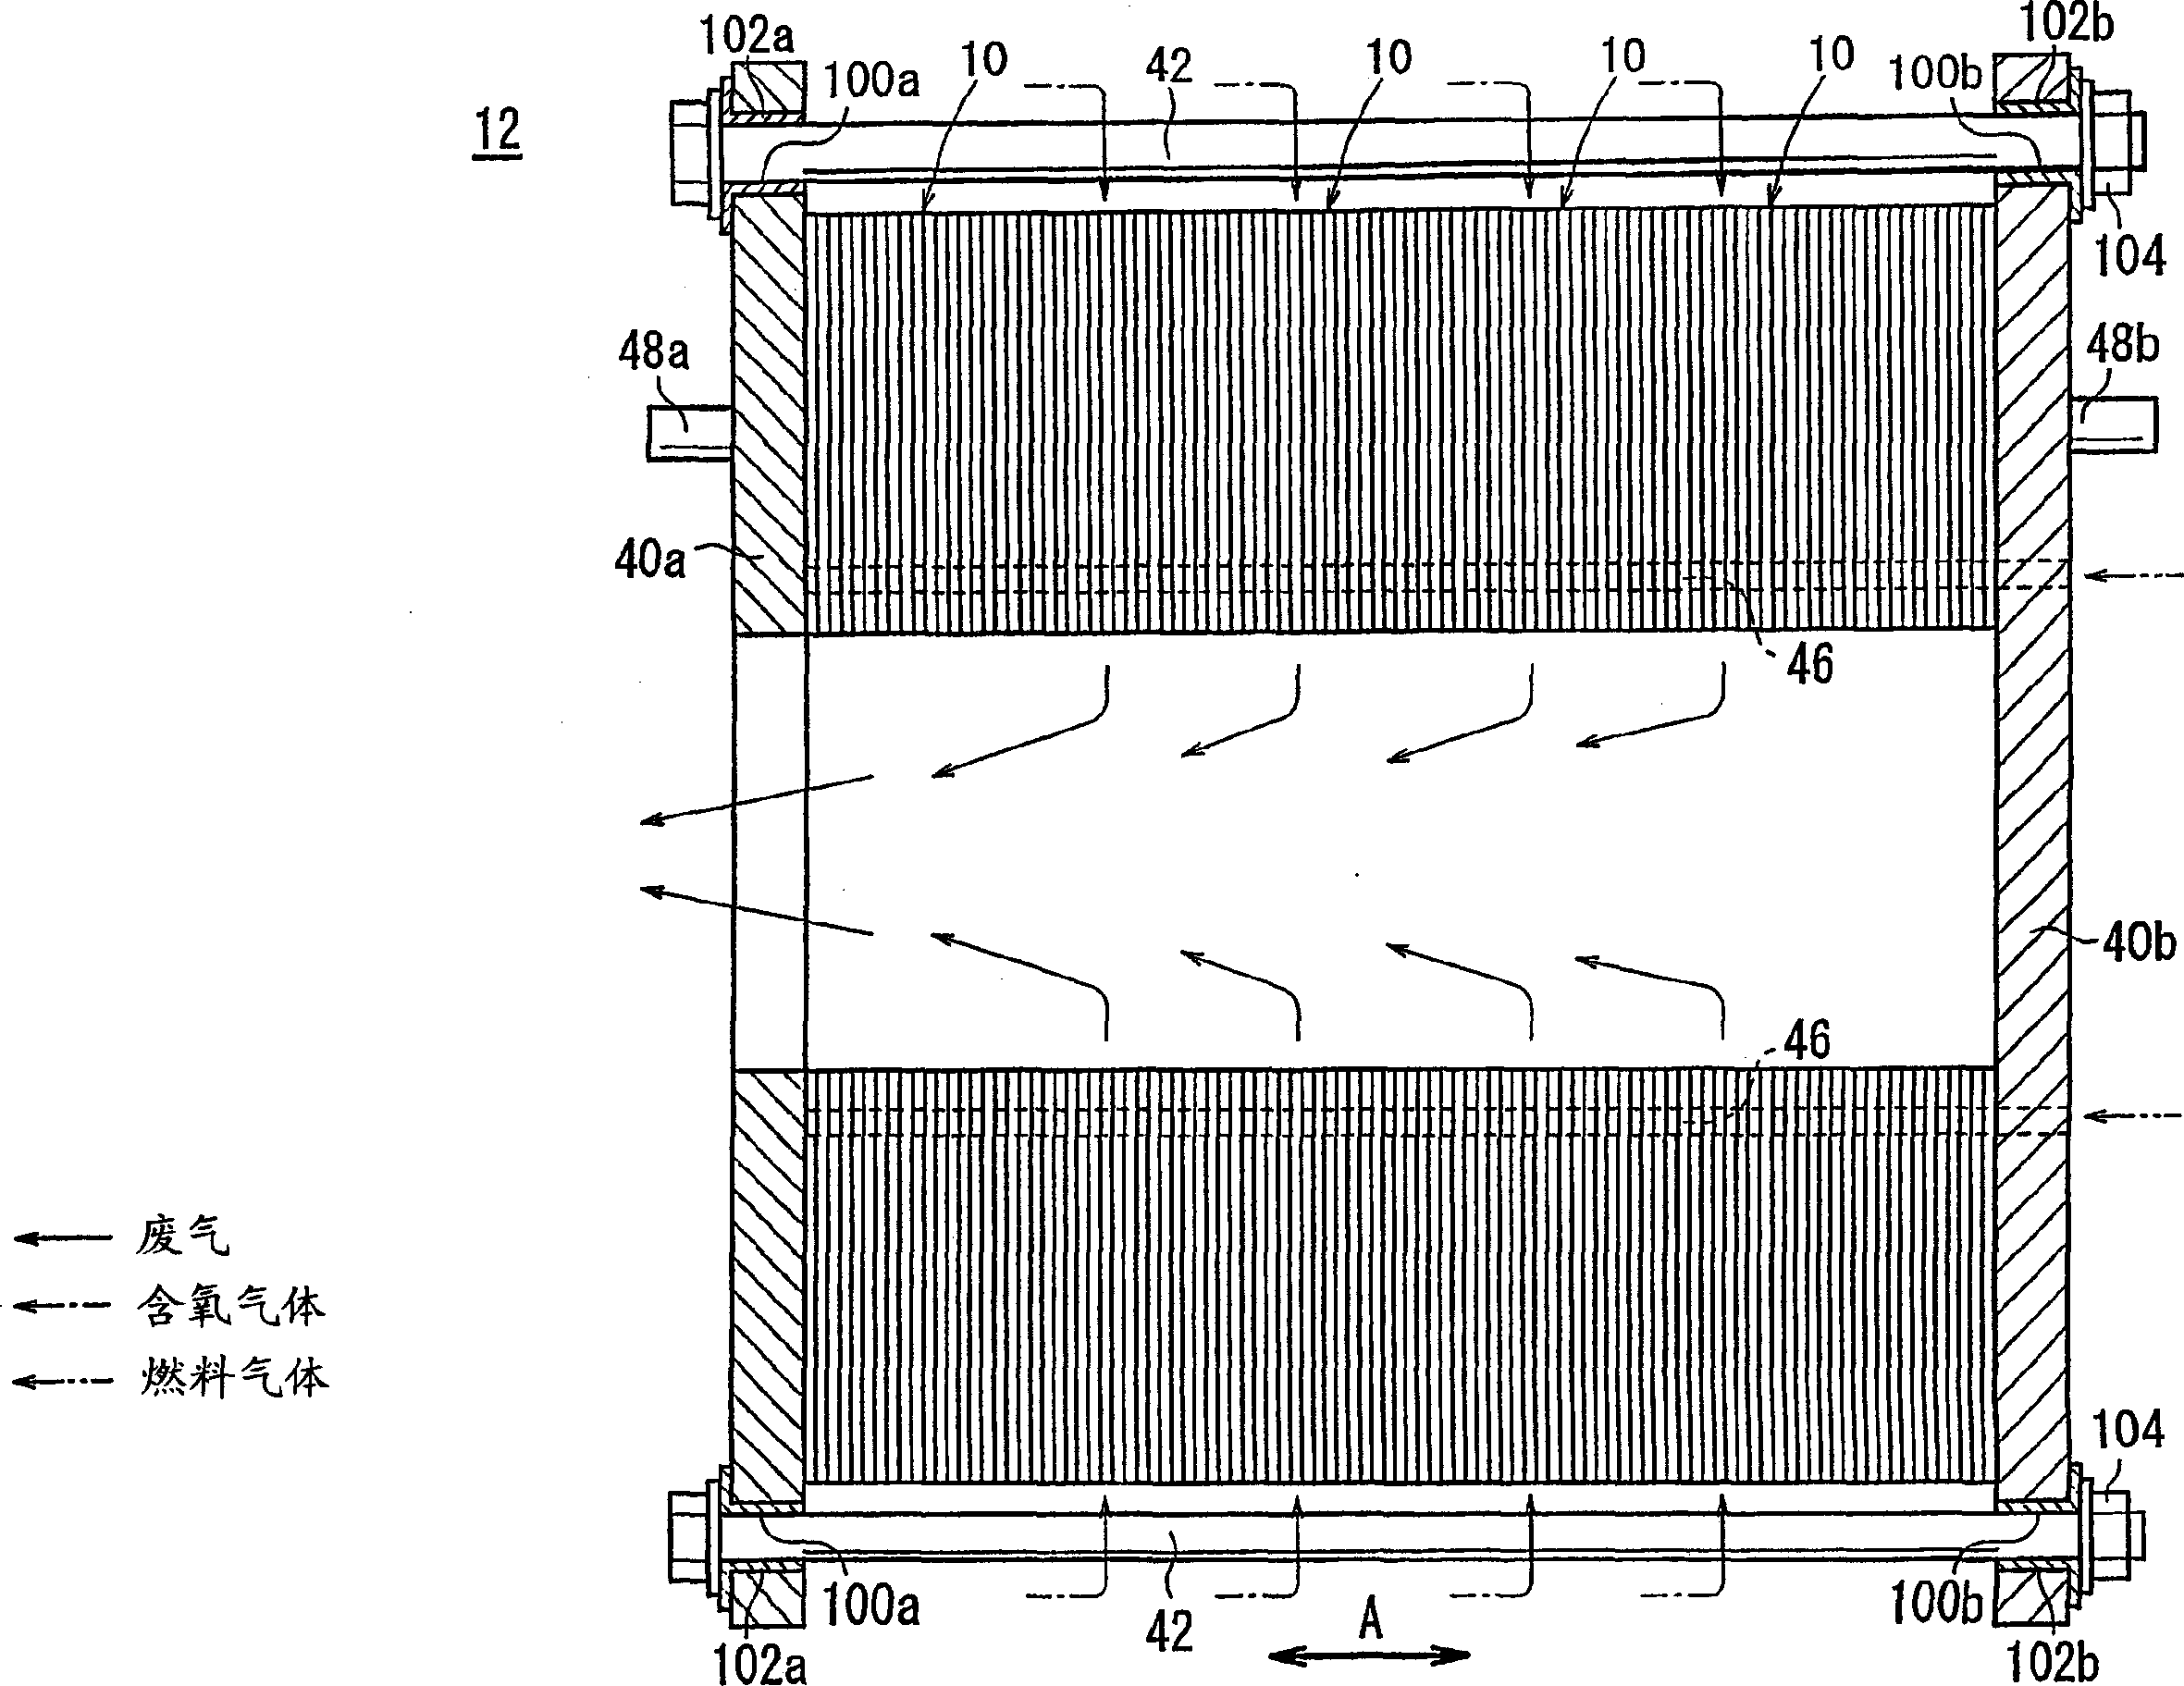 Separator for SOFC with internal reactant gas flow passages